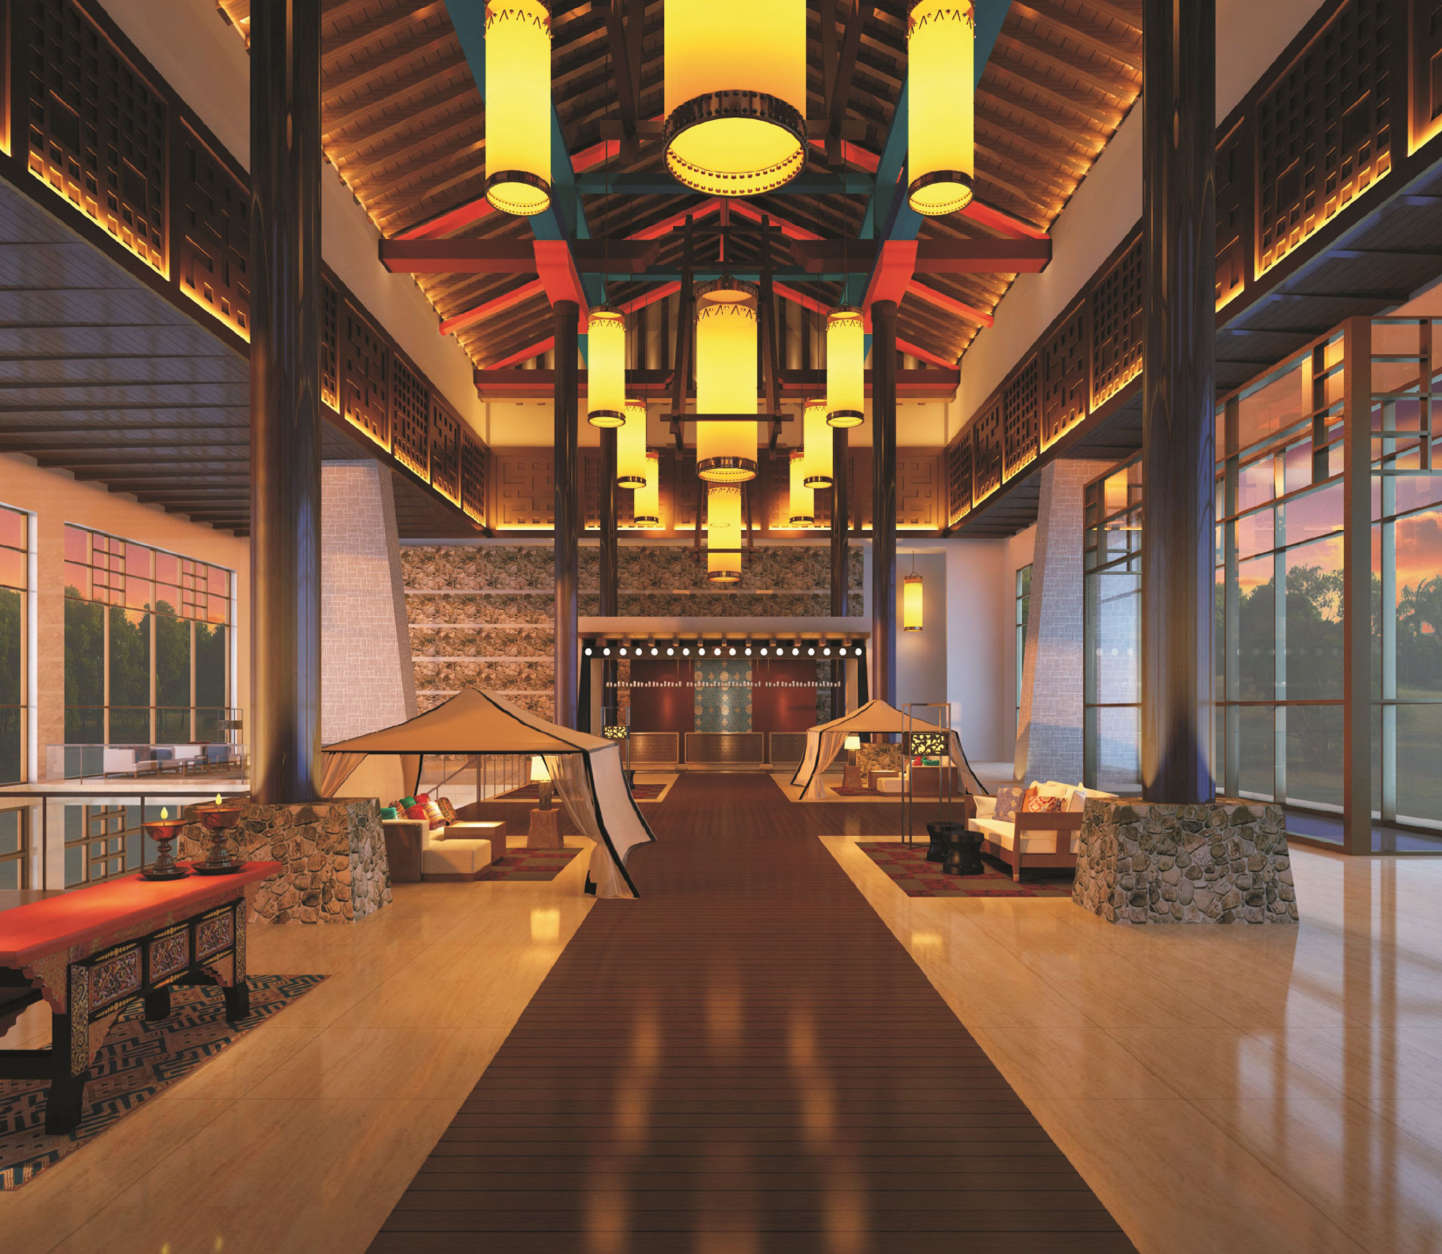 The resort includes 220 rooms and suites, meetings and events spaces, and a fitness center and spa. (Courtesy Hilton)